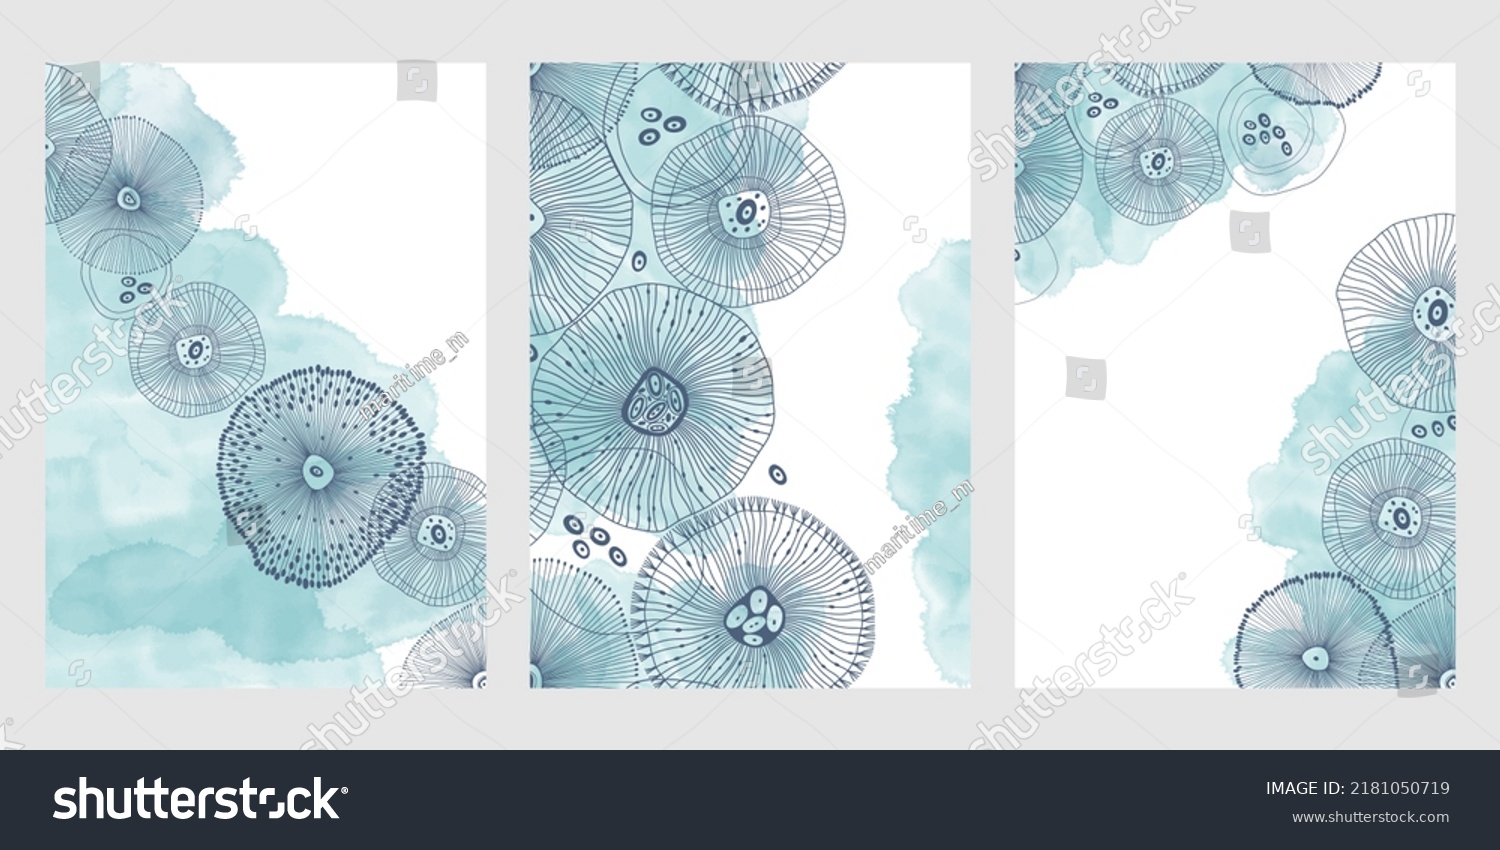 Stock Vector Set Of Card On A Marine Theme With Watercolor Spots And Place For Text Sea Ornament Concept 2181050719 